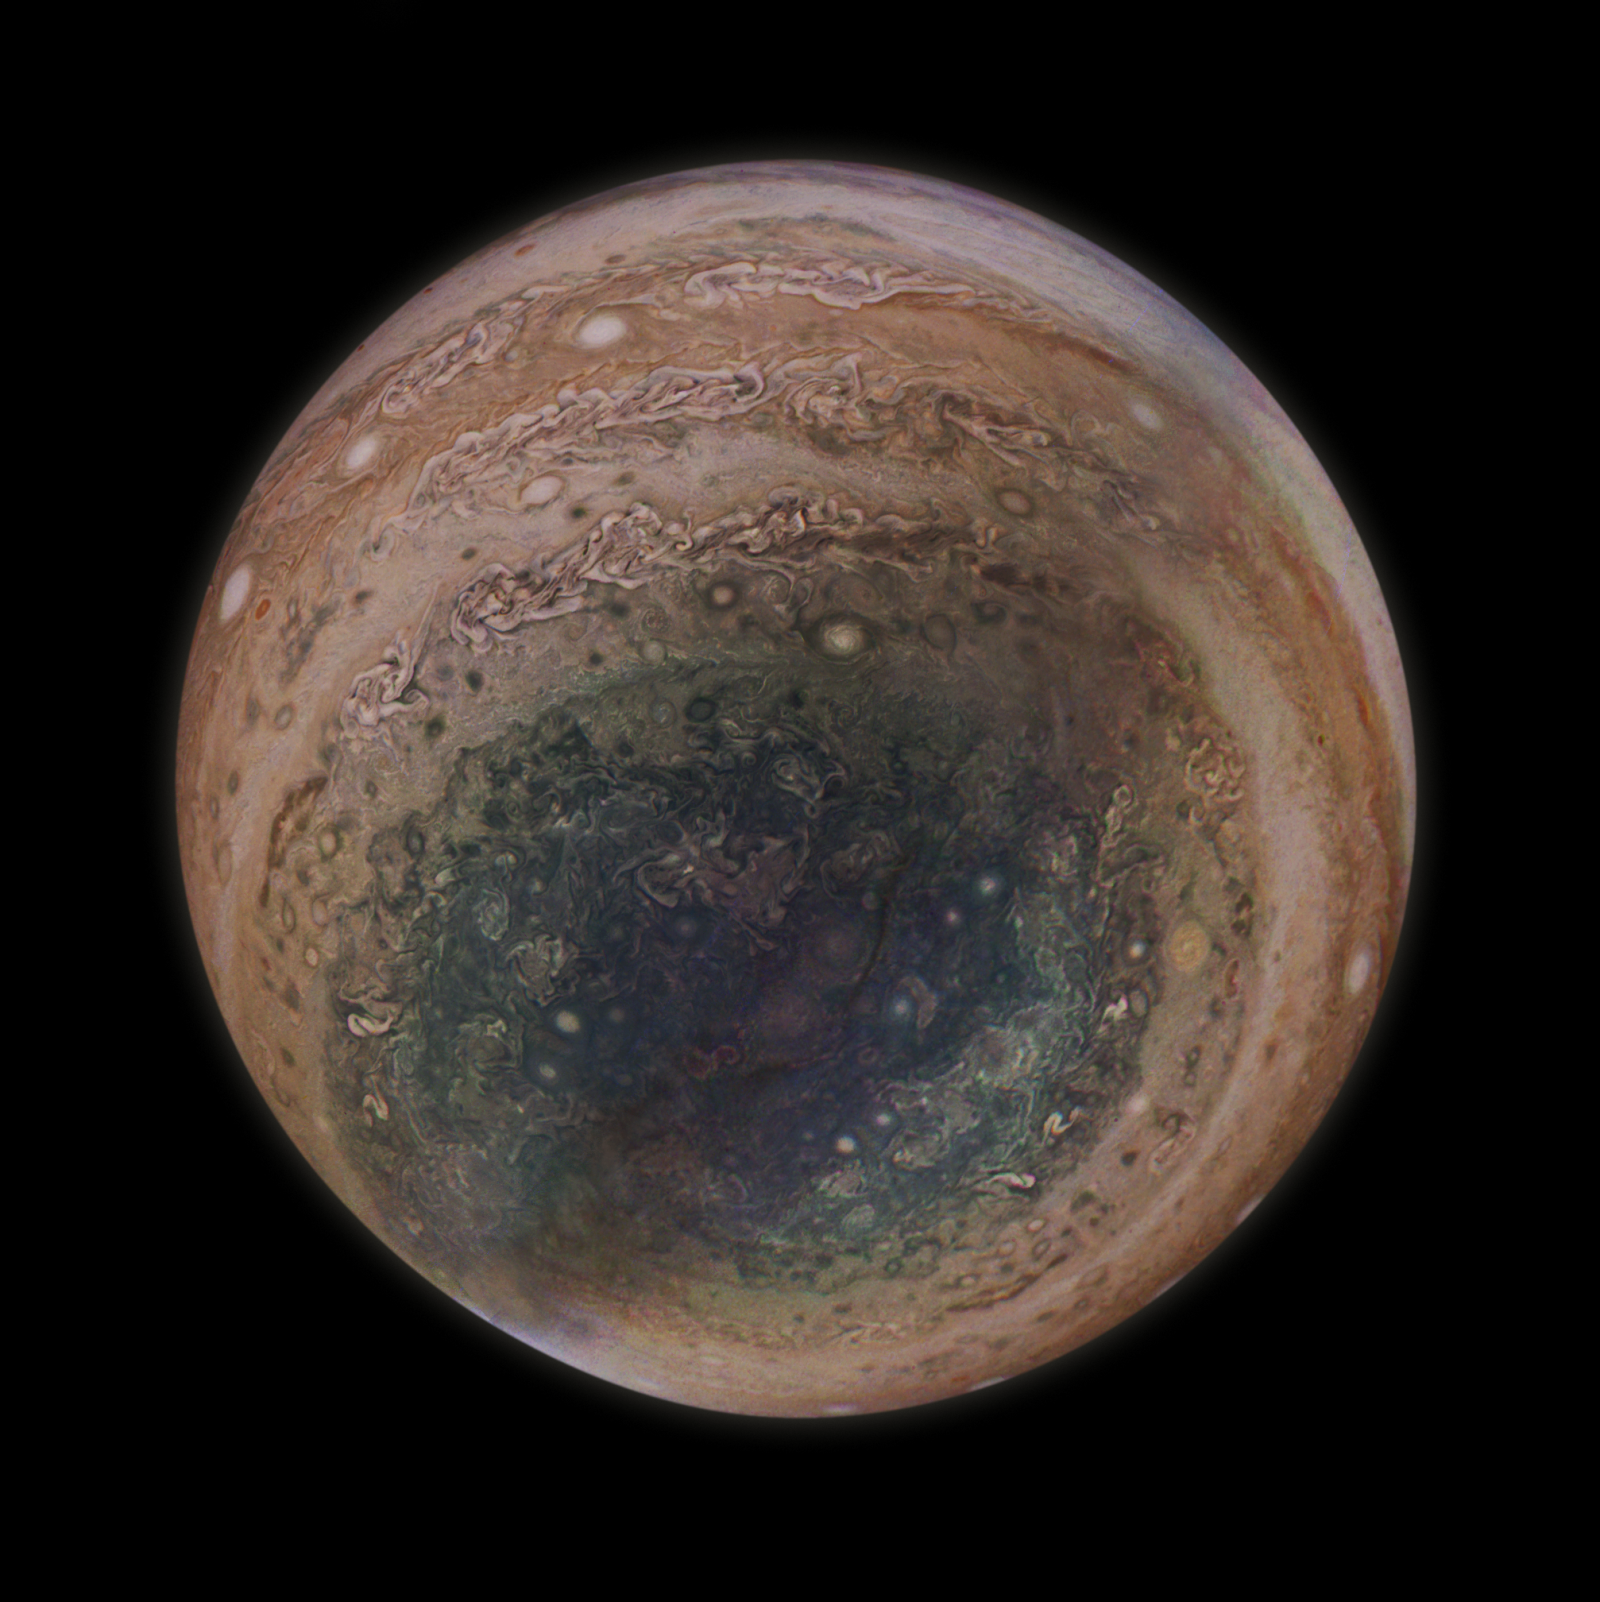 Jupiter's south pole: Nasa's latest release shows breathtaking images ...